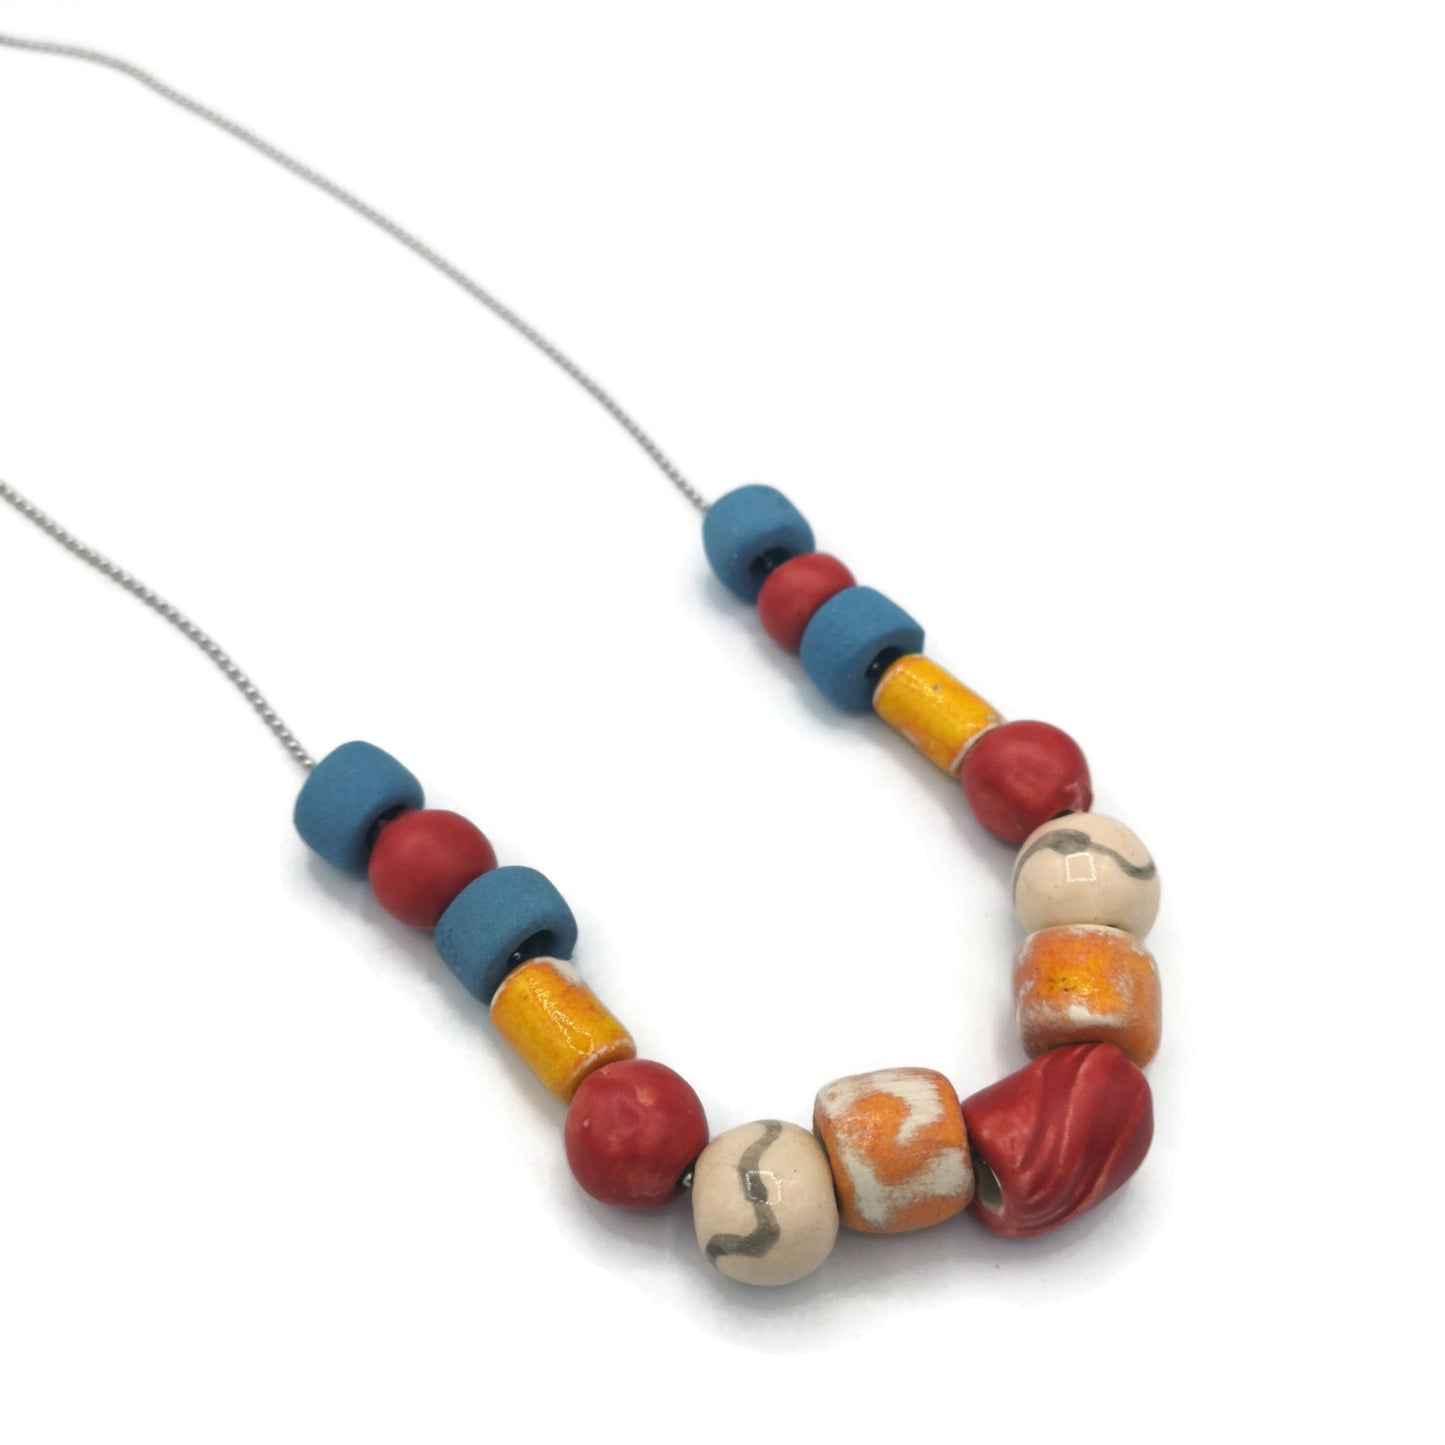 Chunky Statement Beaded Necklace Long, Hippie Necklace Colorful Mom Birthday Gift From Daughter, Aesthetic Clay Necklace - Ceramica Ana Rafael